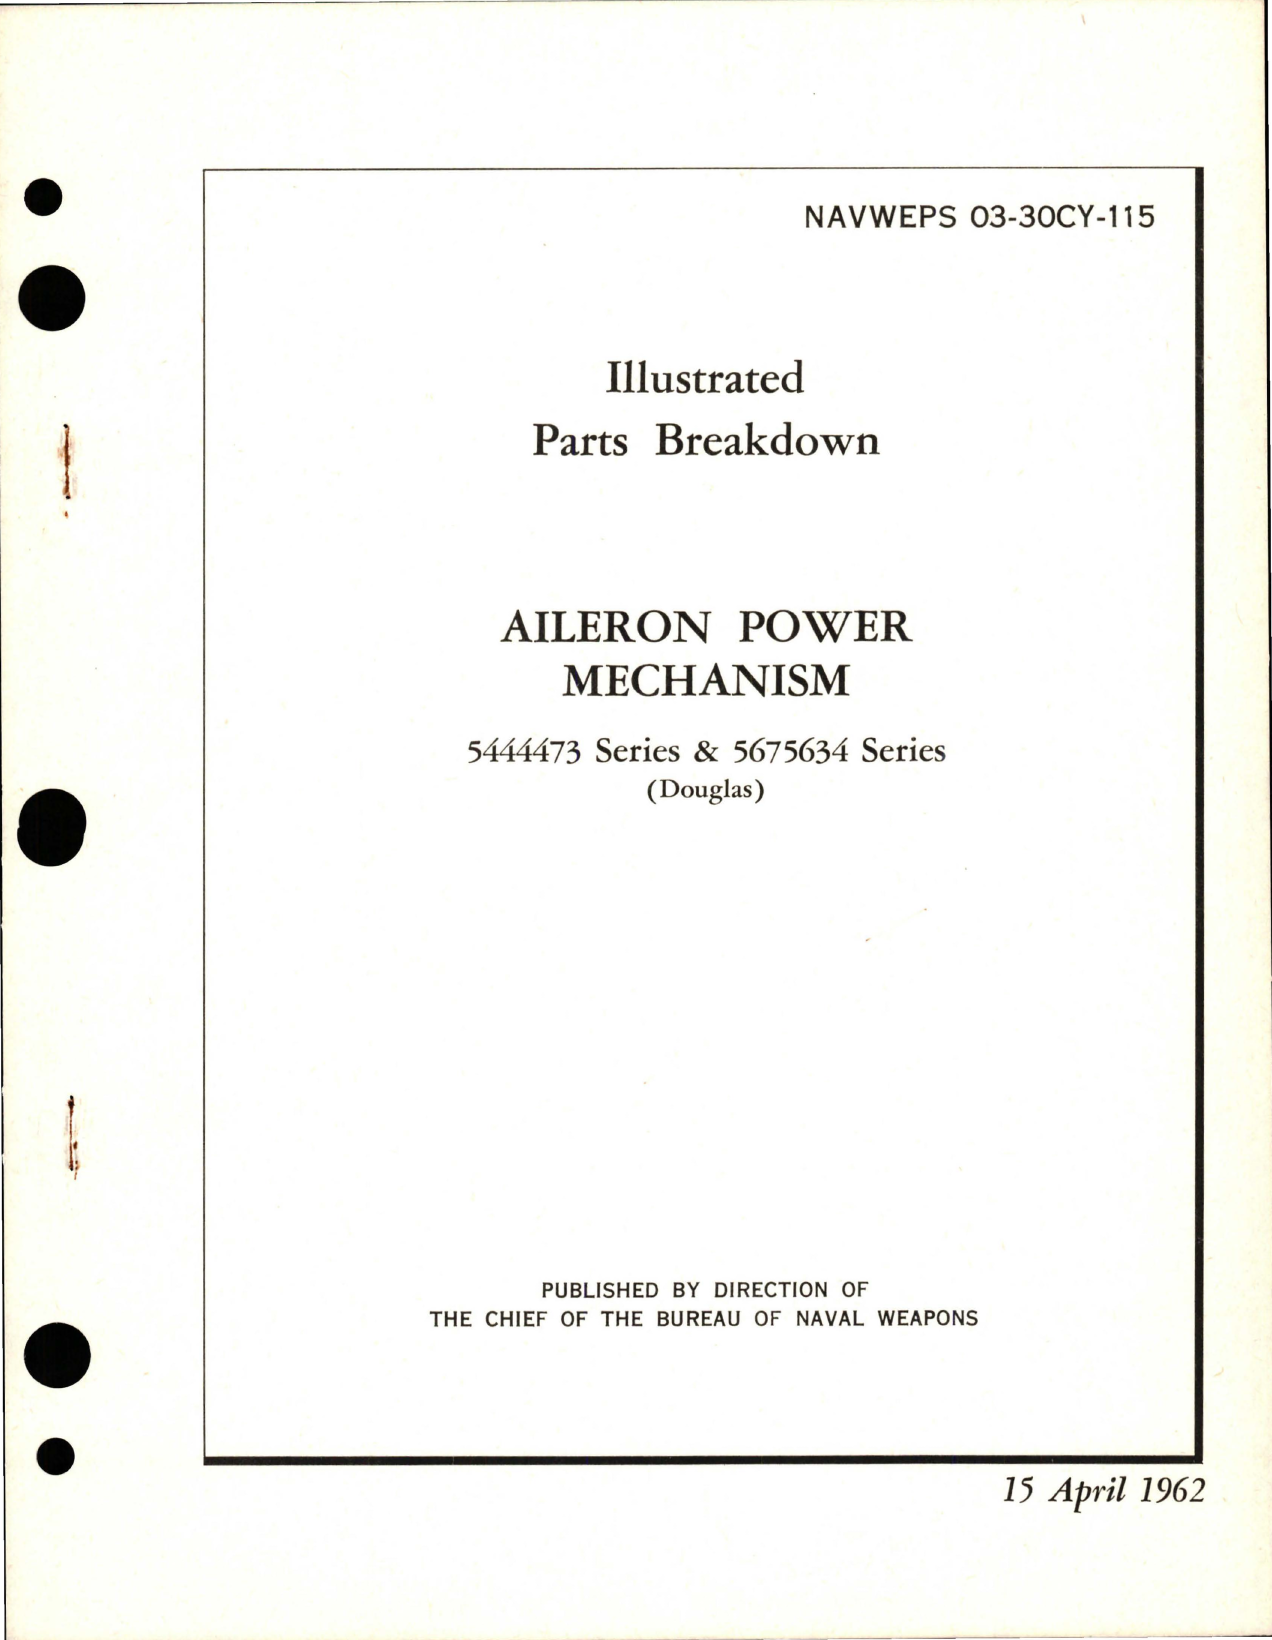 Sample page 1 from AirCorps Library document: Illustrated Parts Breakdown for Aileron Power Mechanism - 5444473 Series and 5675634 Series 